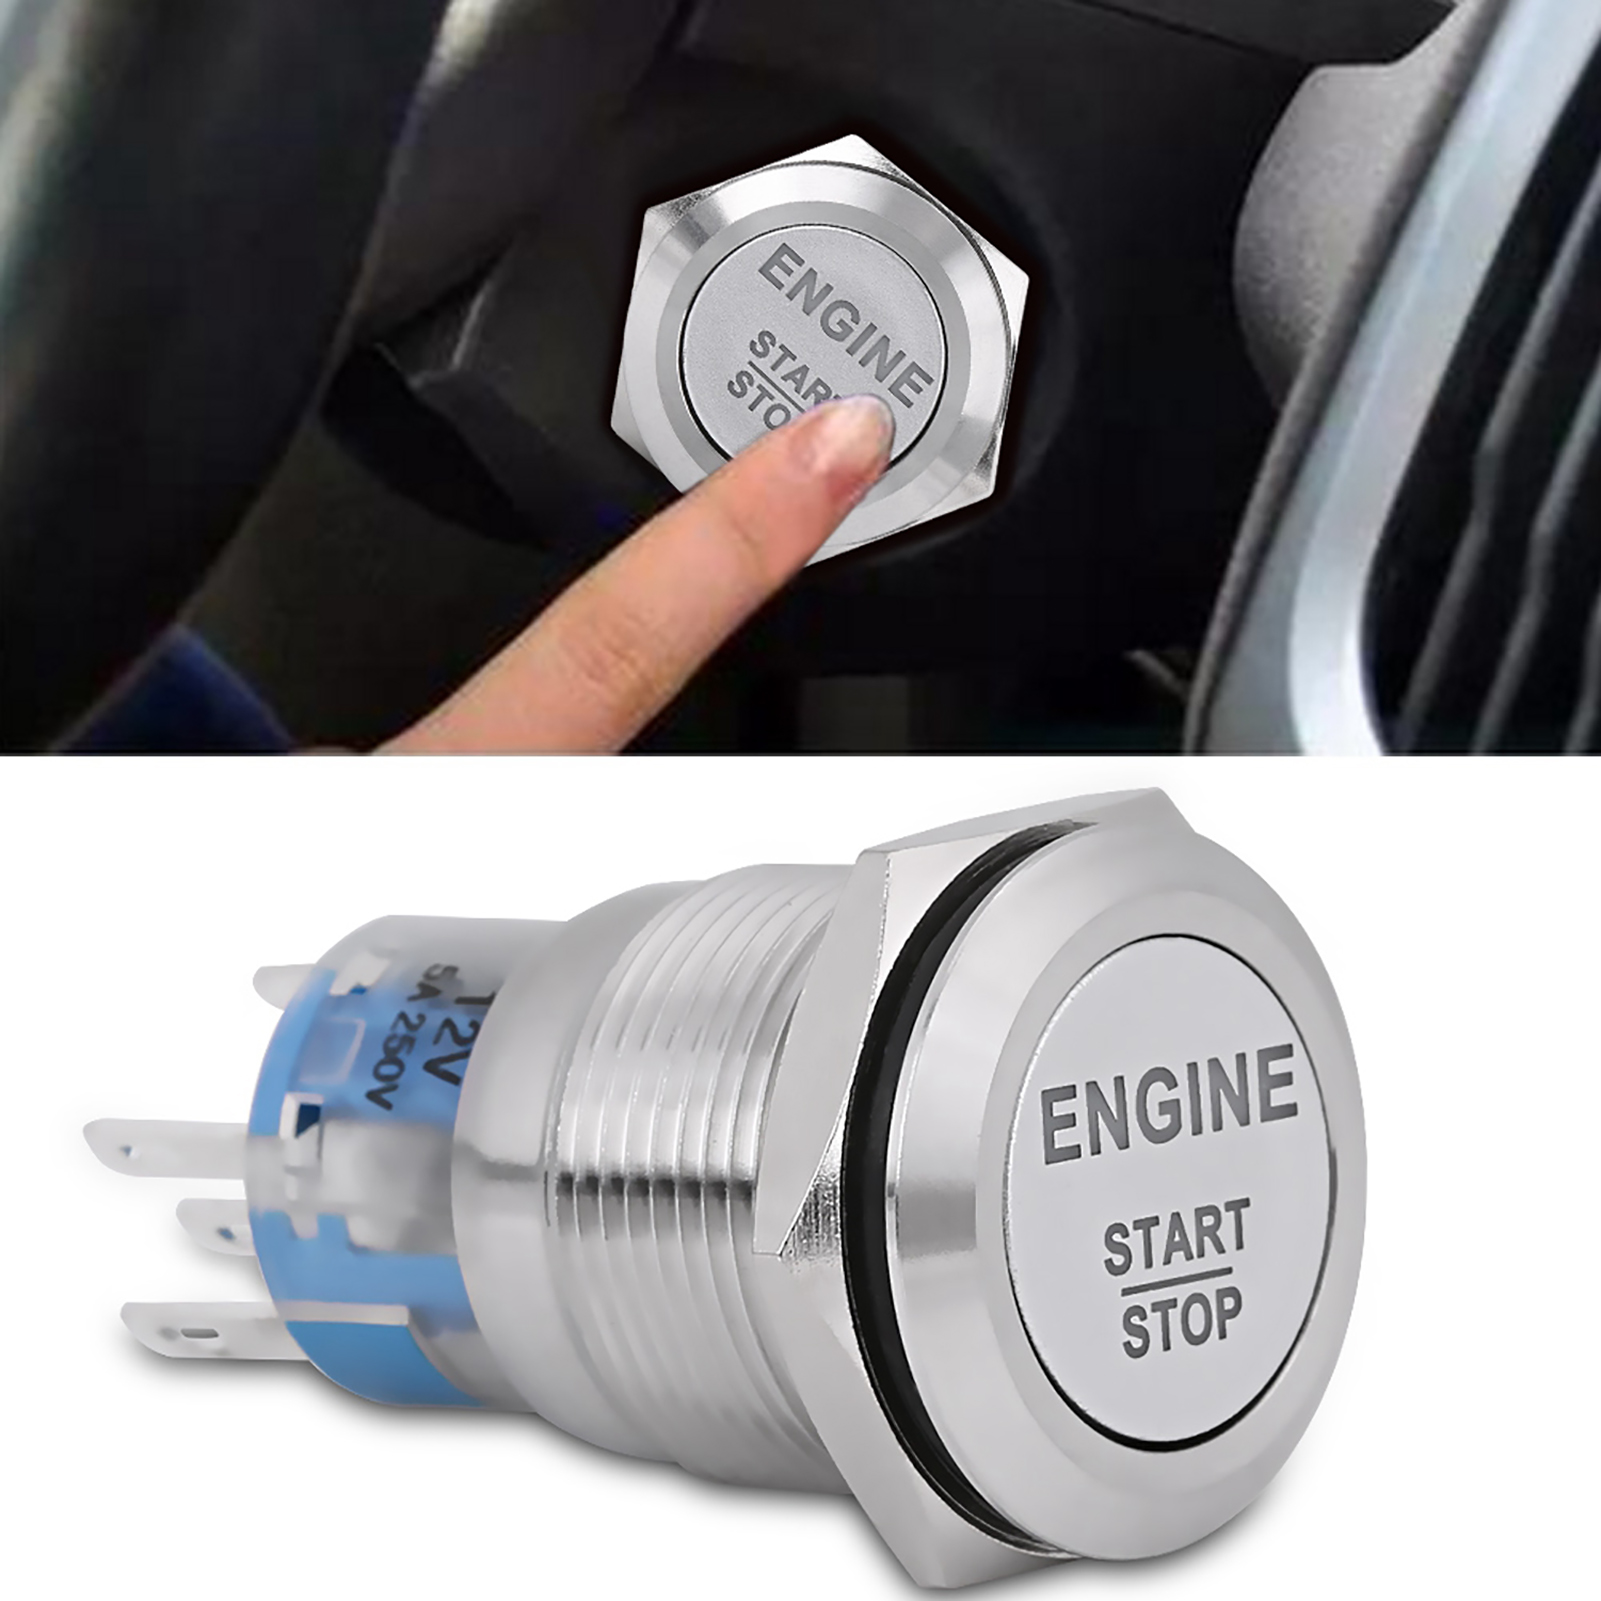 Black Silver Zinc-Aluminium Alloy Silver Push Start Ignition Switch,12V White LED Car Engine Start Stop Push Button Switch Stainless Steel 